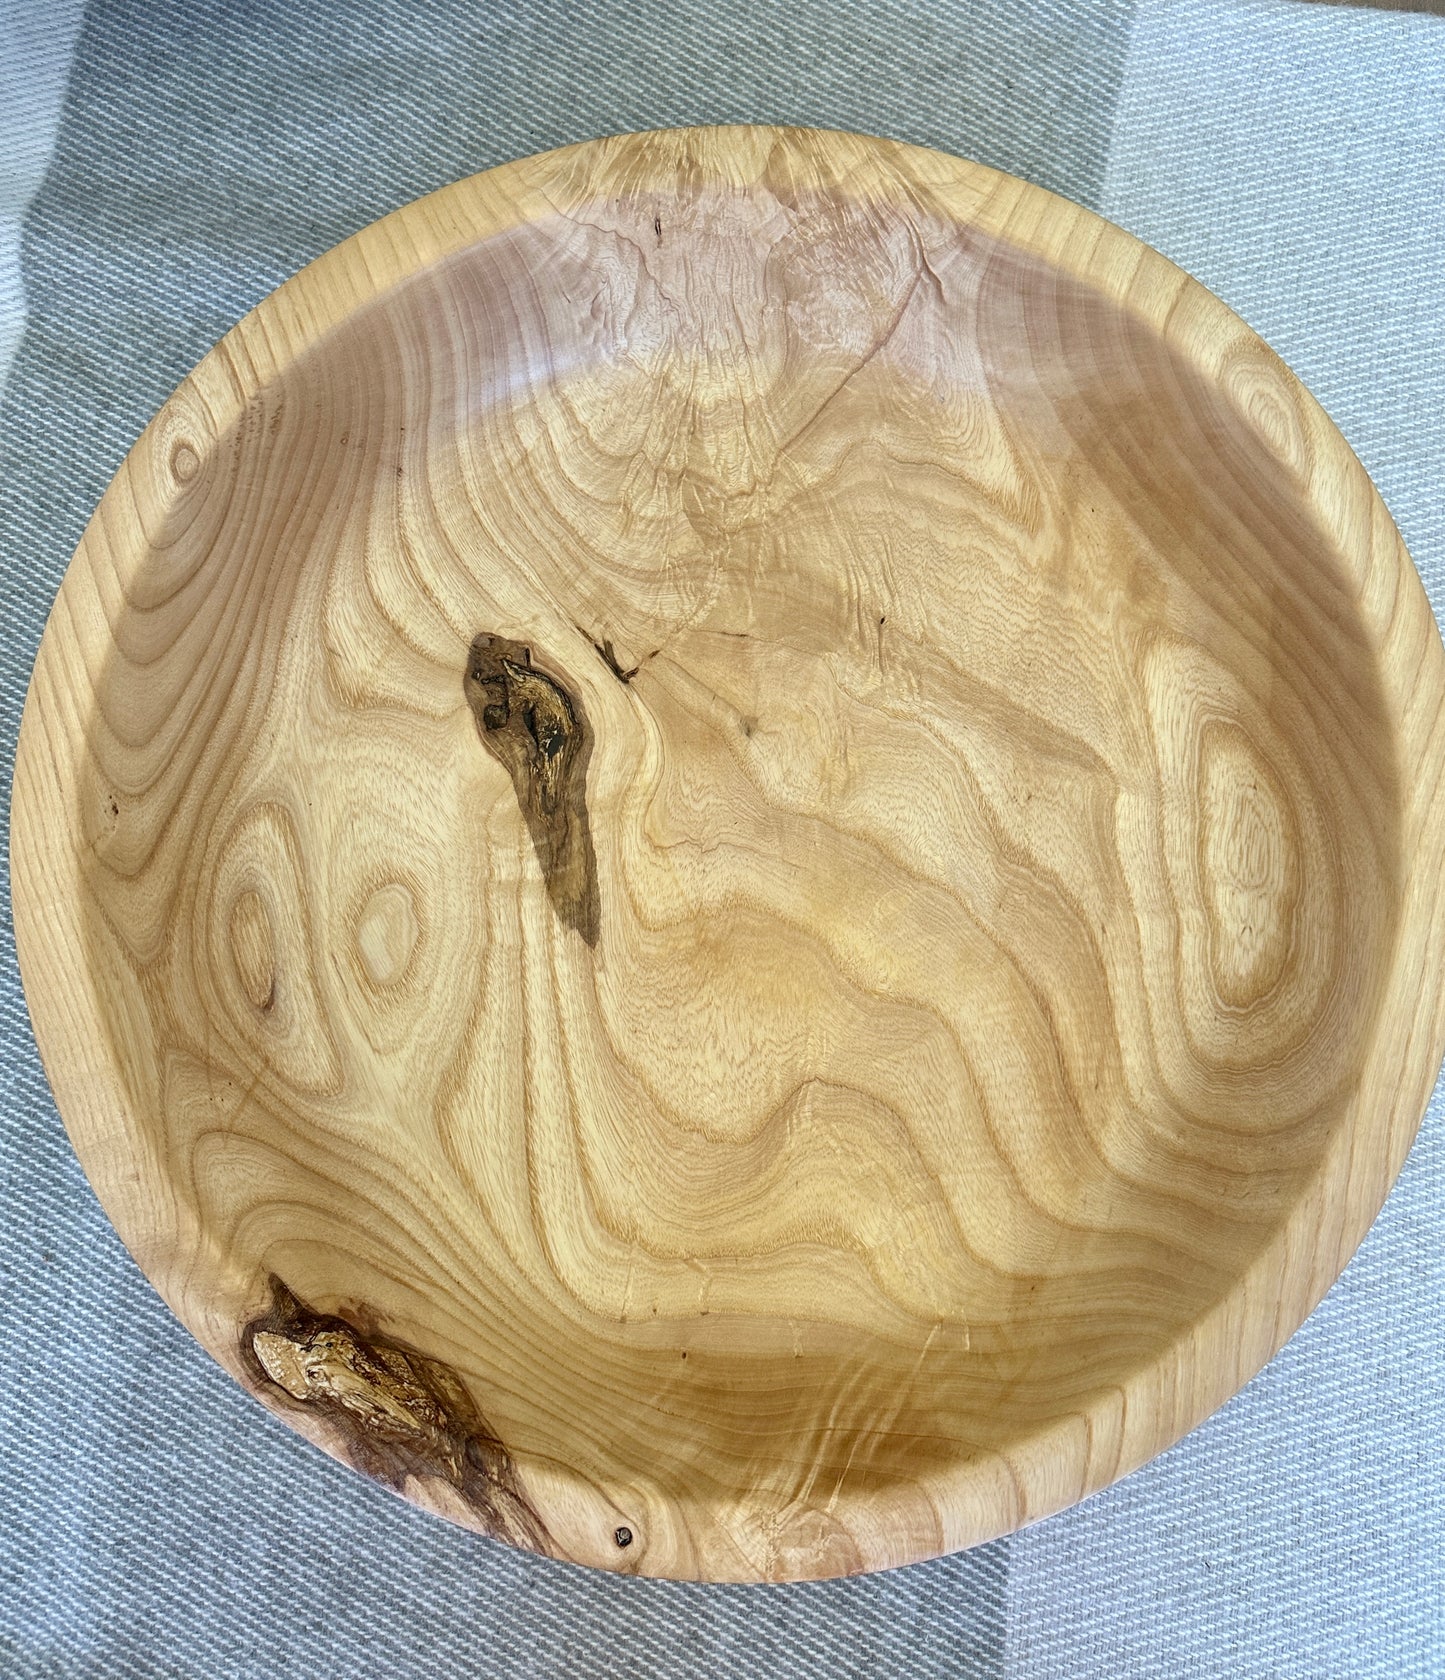 Handcrafted Ash Wood Bowl, 15 inch diameter